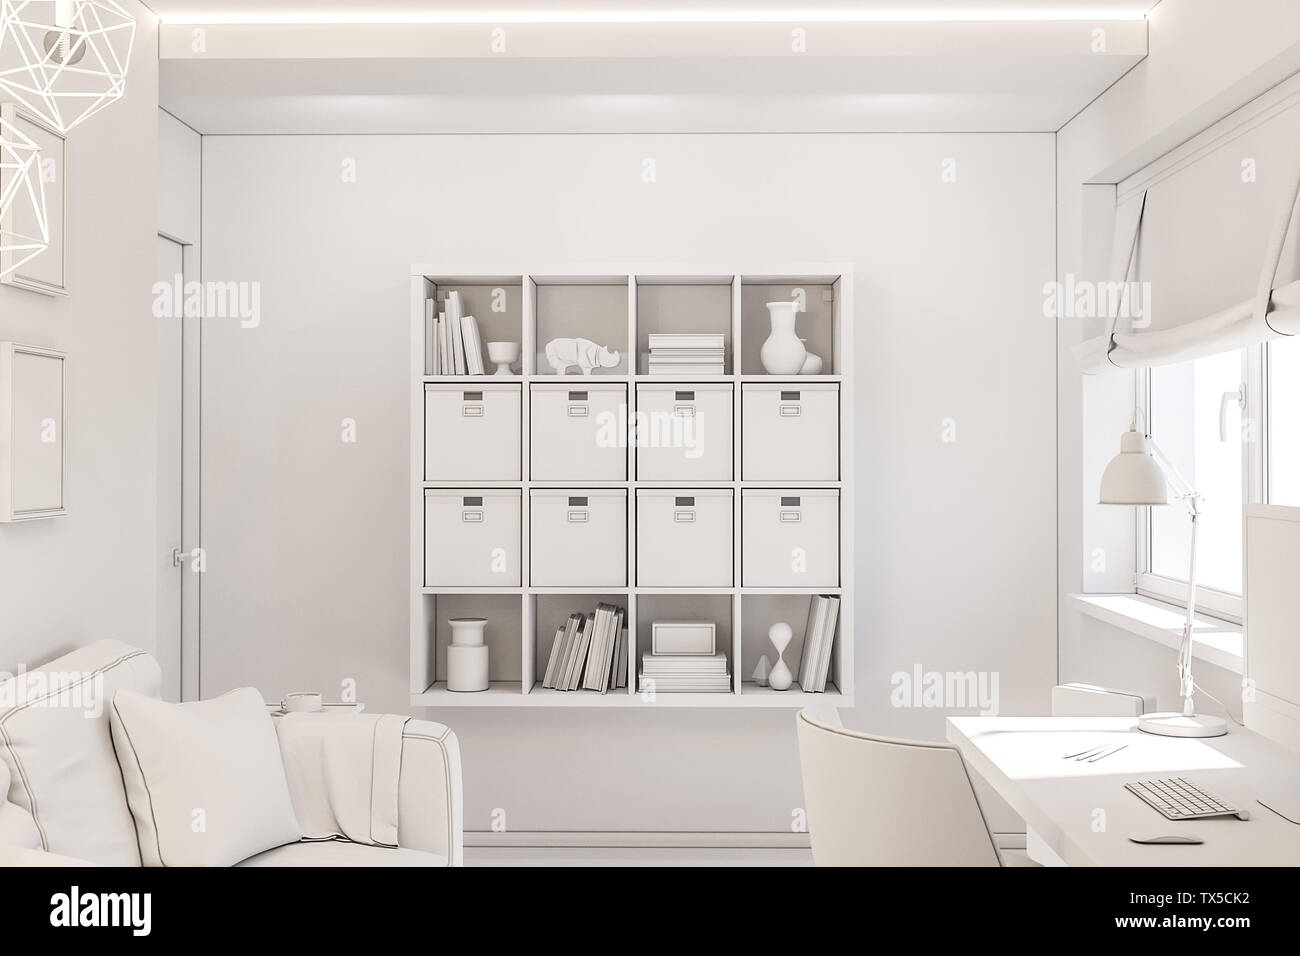 Home office interior design concept in a private cottage. 3d illustration of the interior in white color without textures. For your custom design Stock Photo